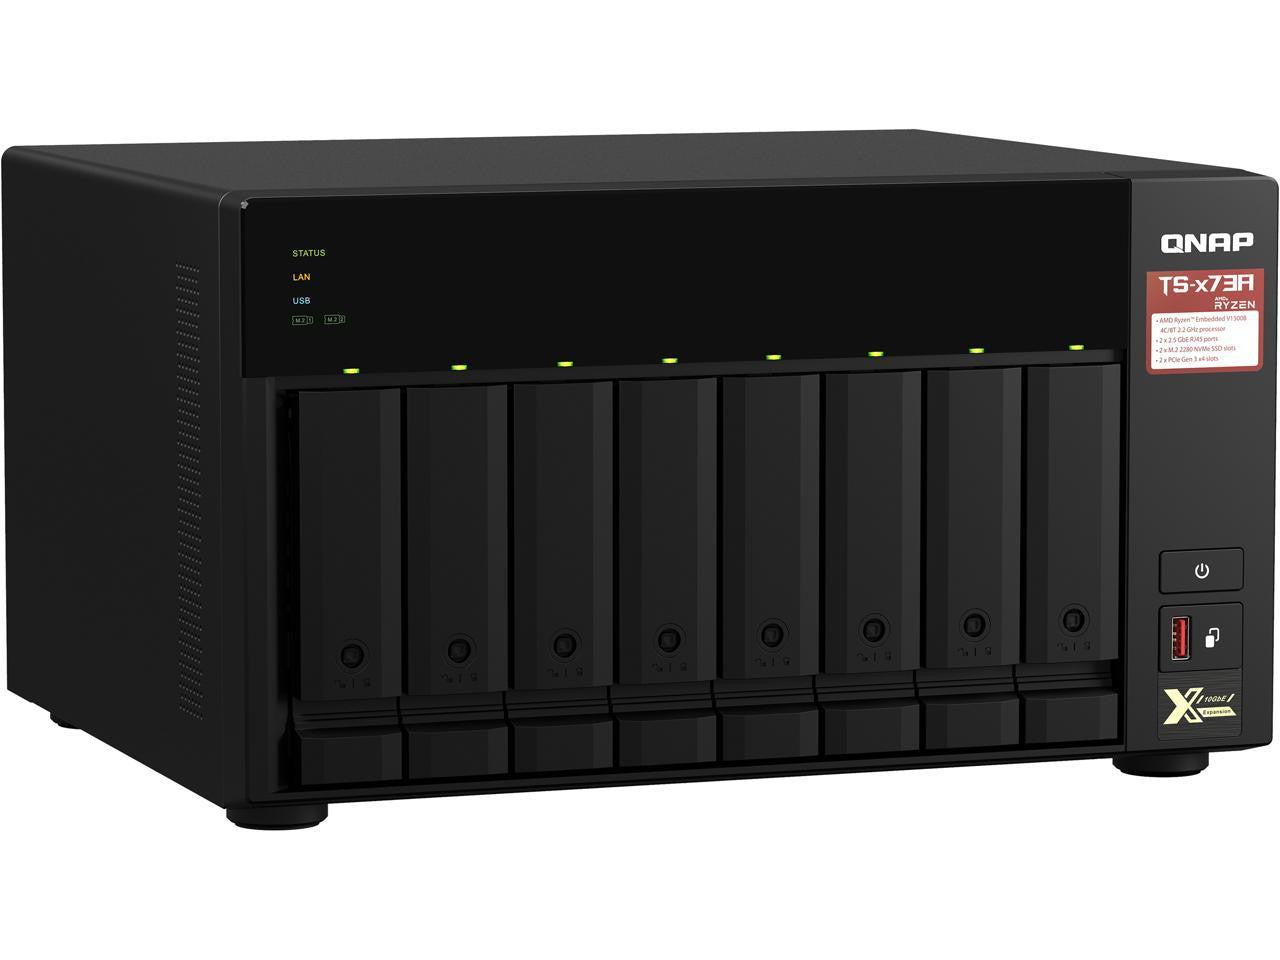 QNAP TS-873A 8-BAY NAS with 16GB DDR4 RAM and 112TB (8x14TB) Western Digital RED PLUS Drives Fully Assembled and Tested